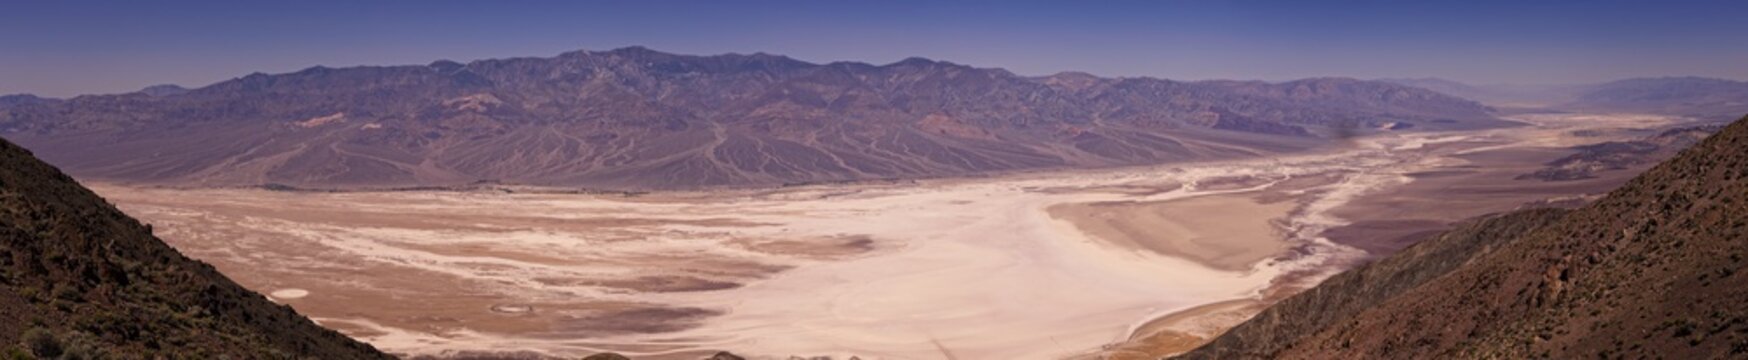 Panoramic View of Death Valley National Park, California, USA 